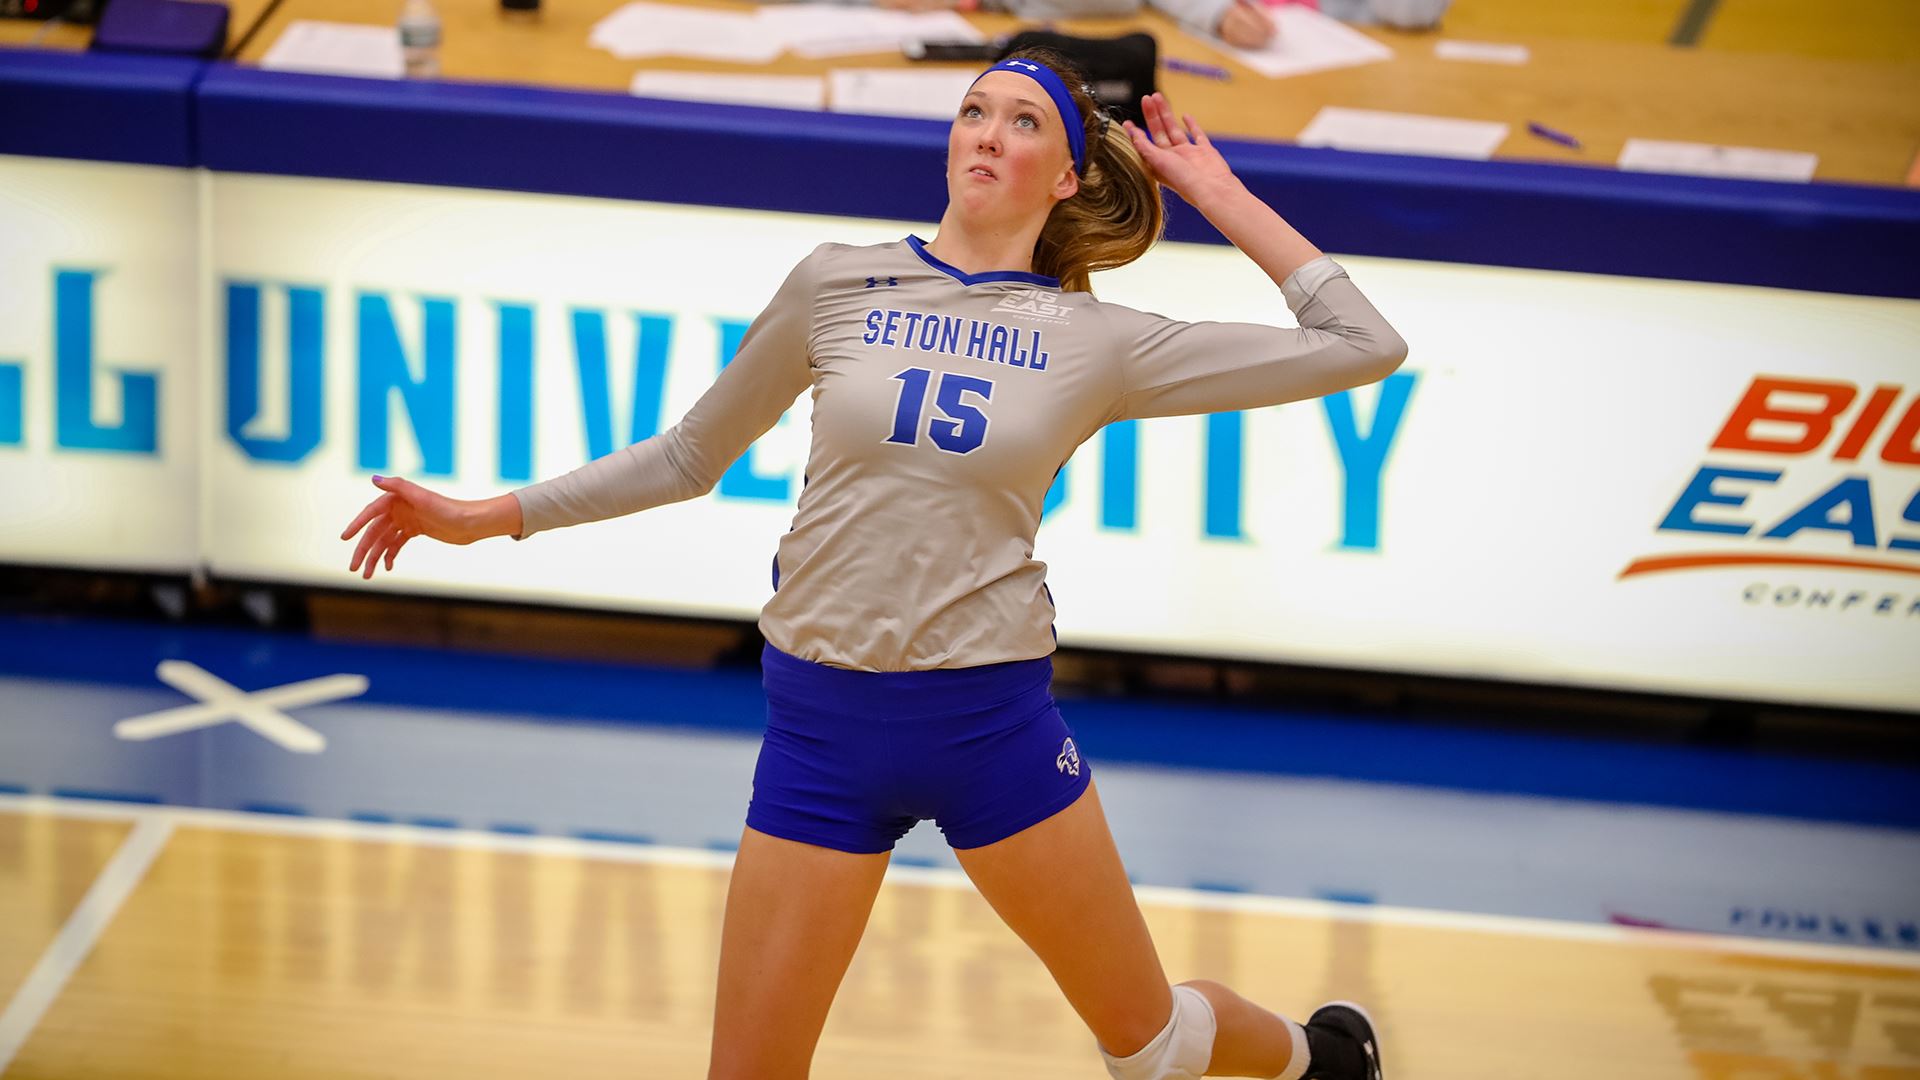 A Seton Hall women's volleyball player tries to spike the ball over the net during a home match.